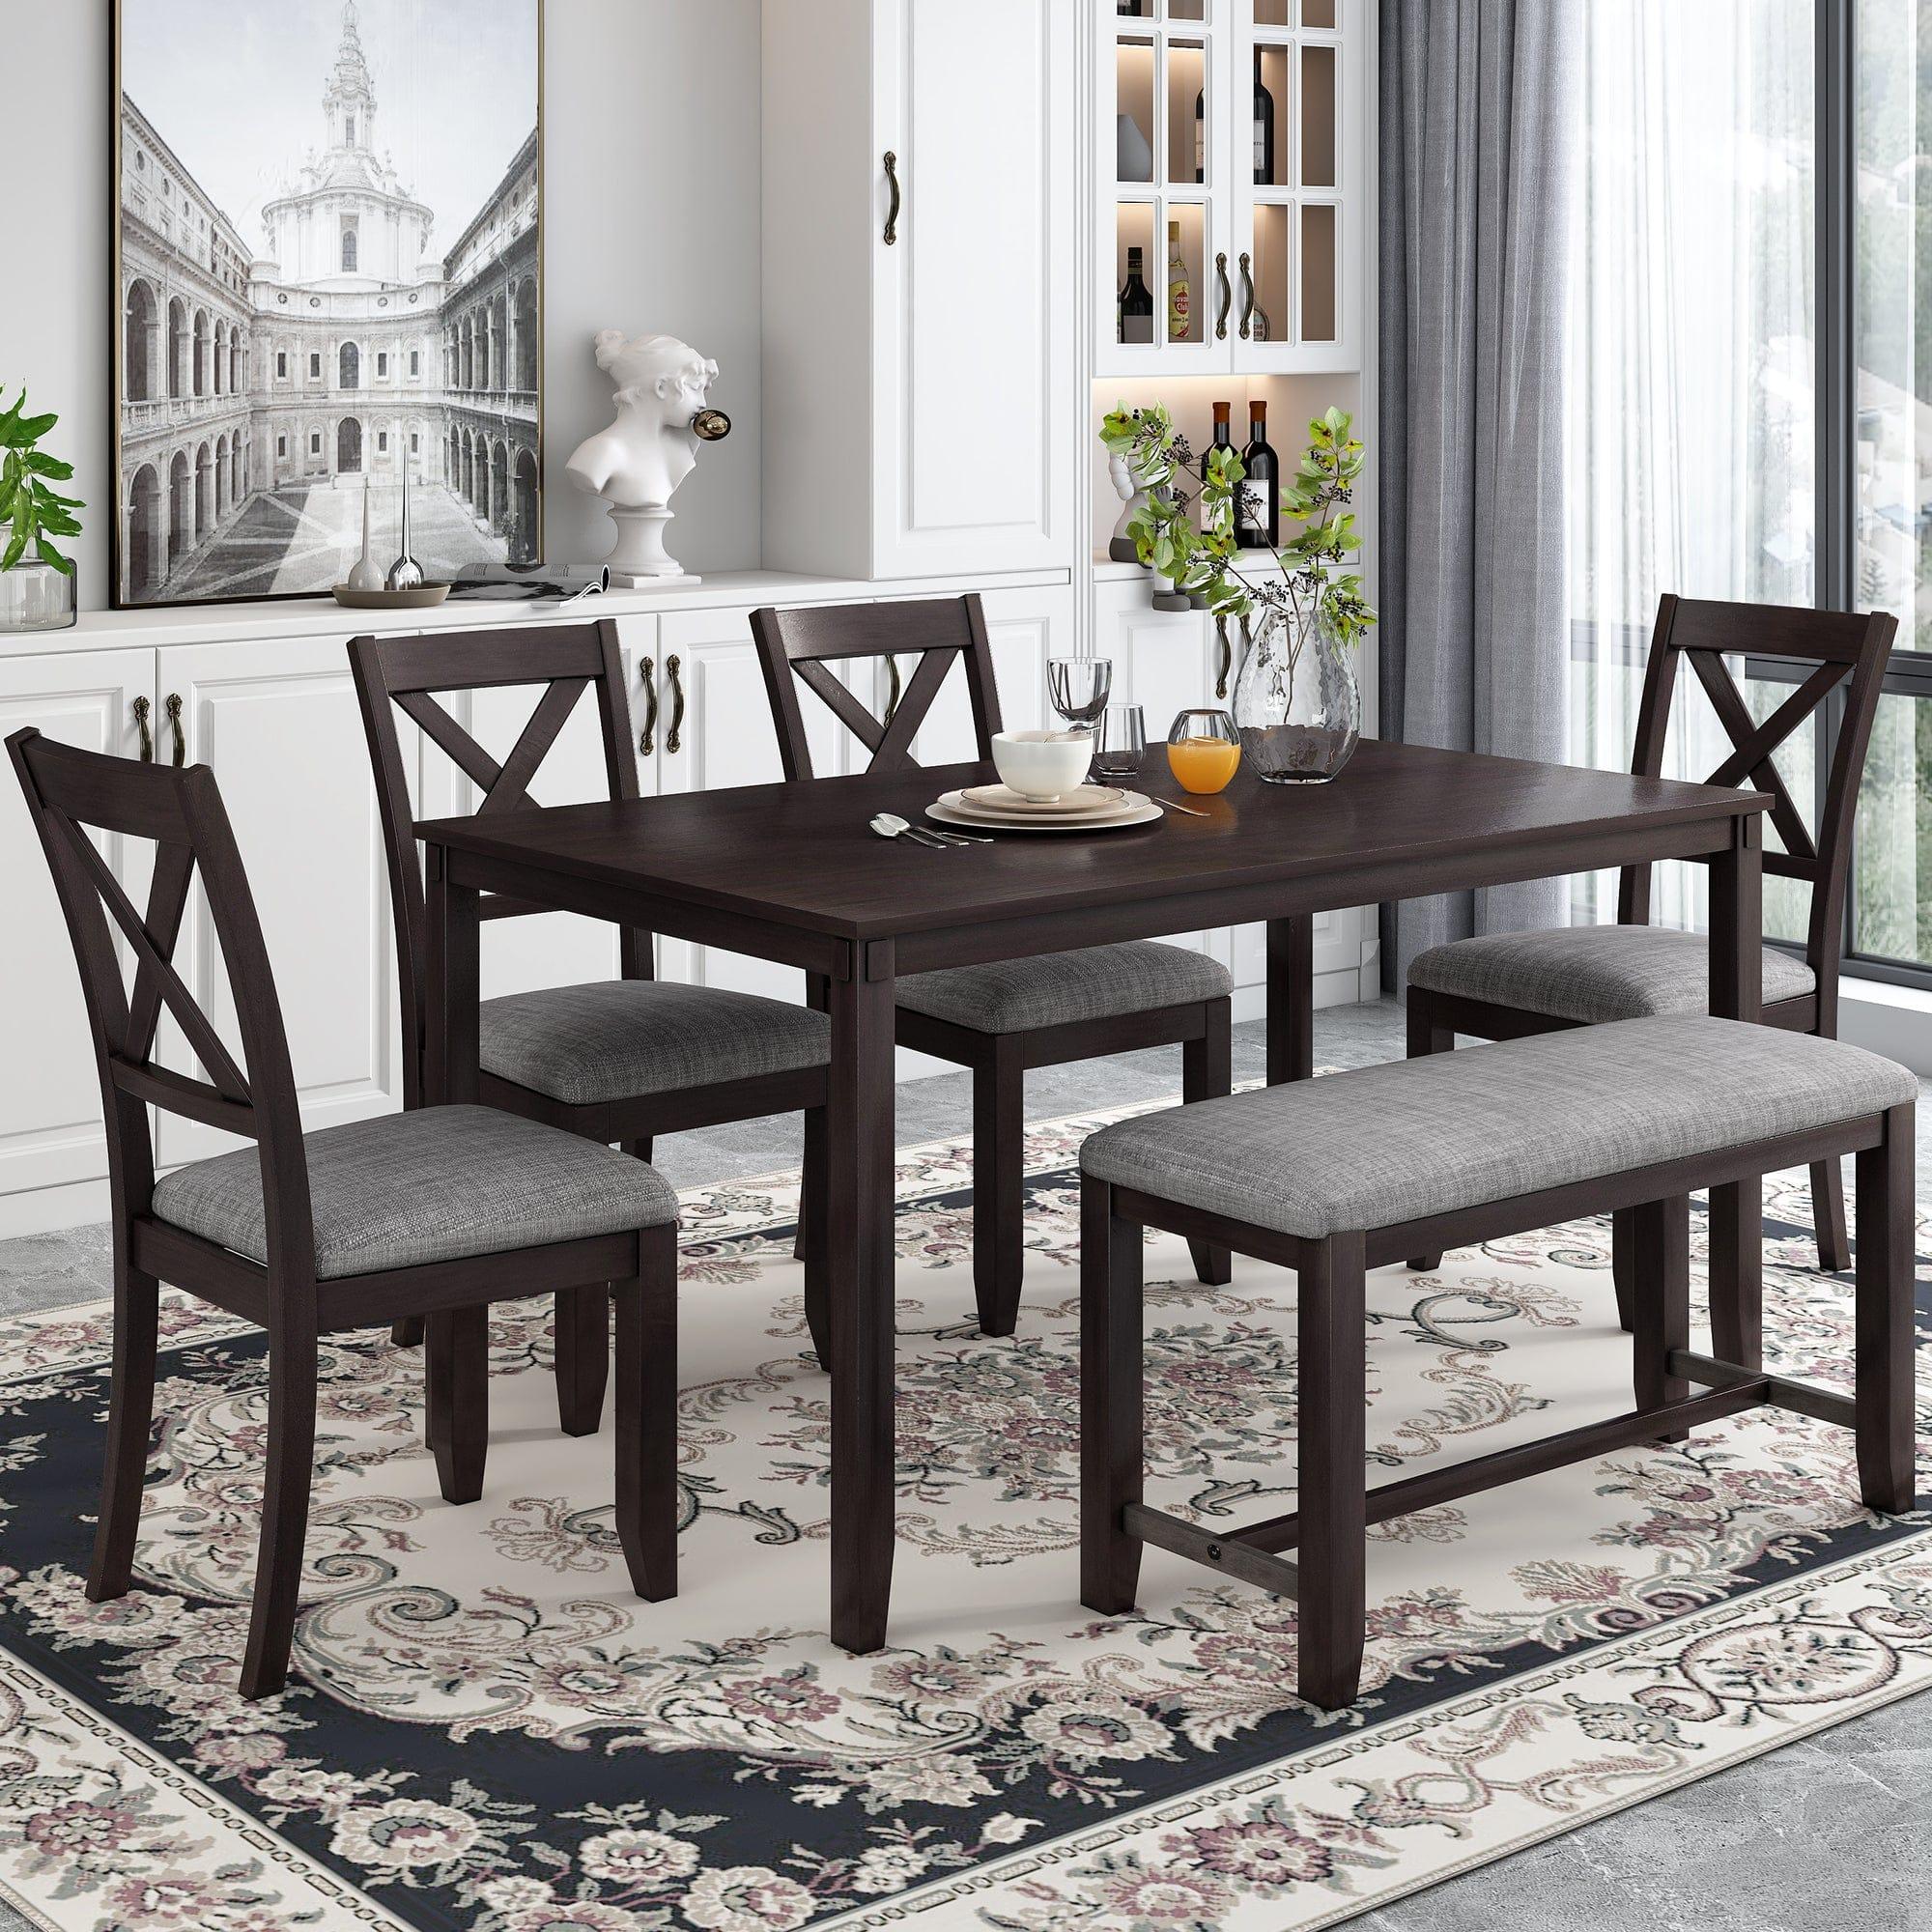 Shop TREXM 6-Piece Kitchen Dining Table Set Wooden Rectangular Dining Table, 4 Dining Chairs and Bench Family Furniture for 6 People (Espresso) Mademoiselle Home Decor